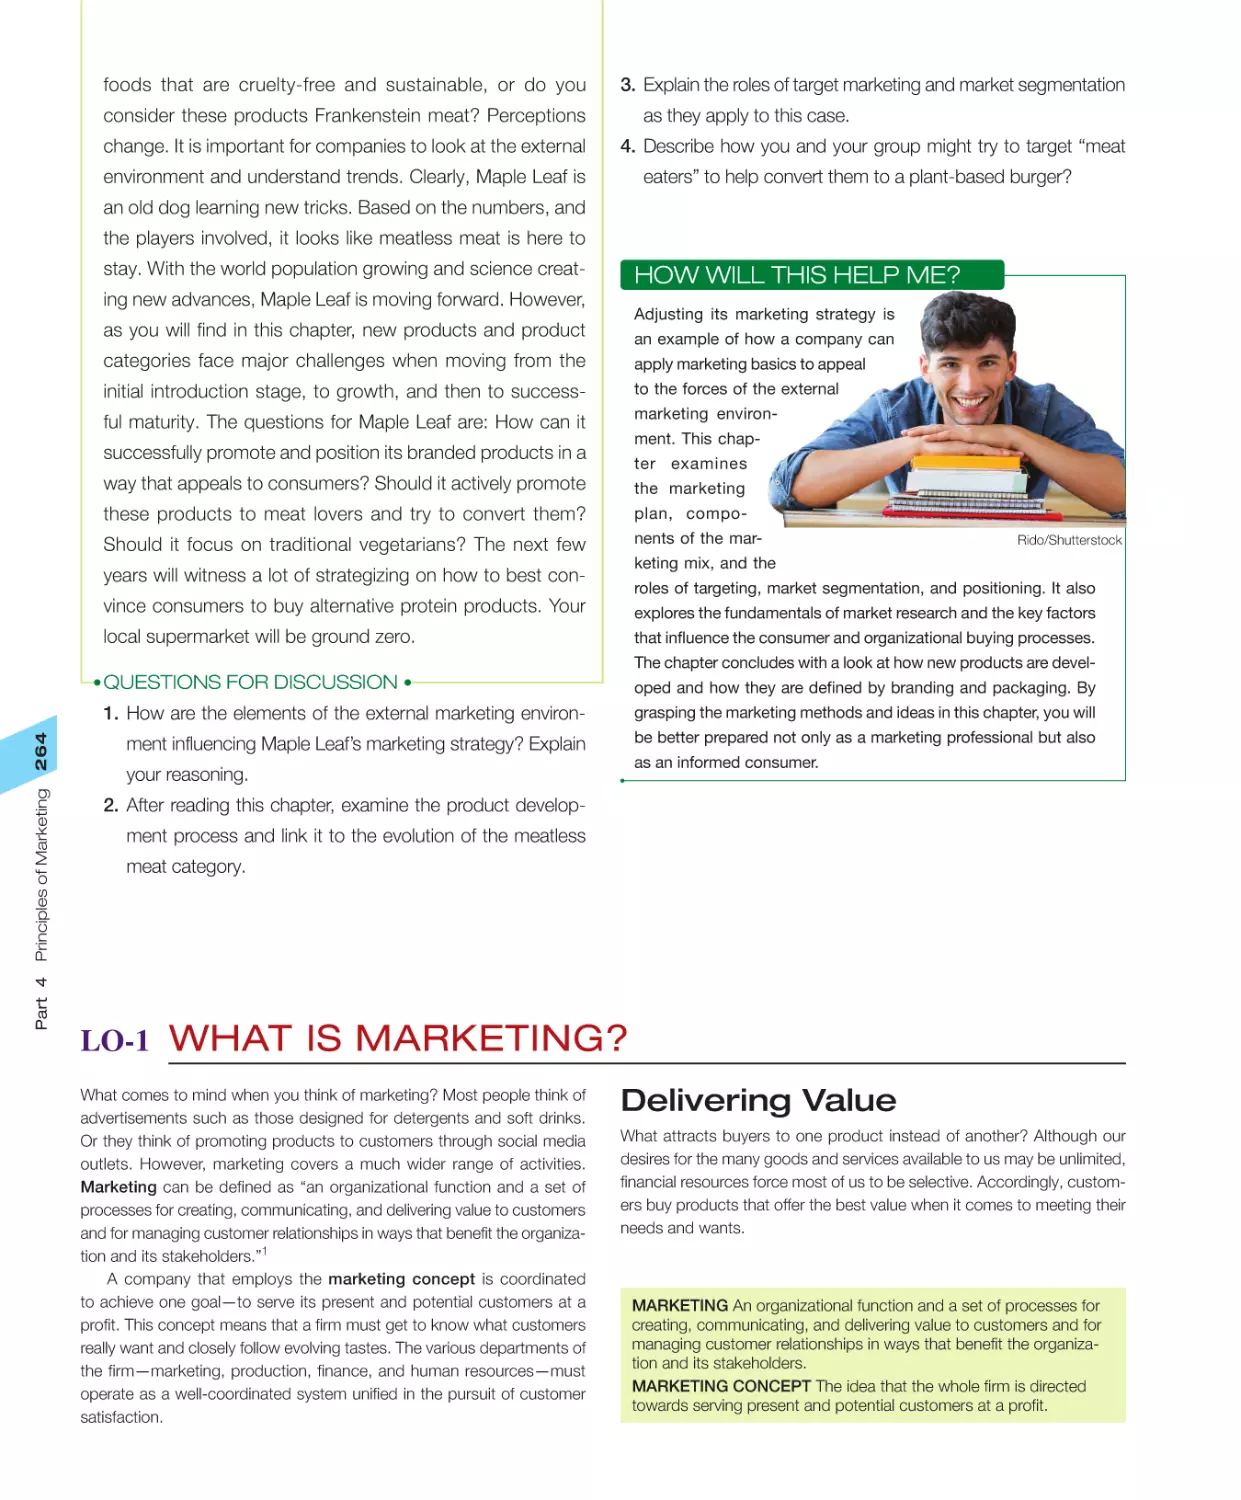 LO‐1 What Is Marketing?